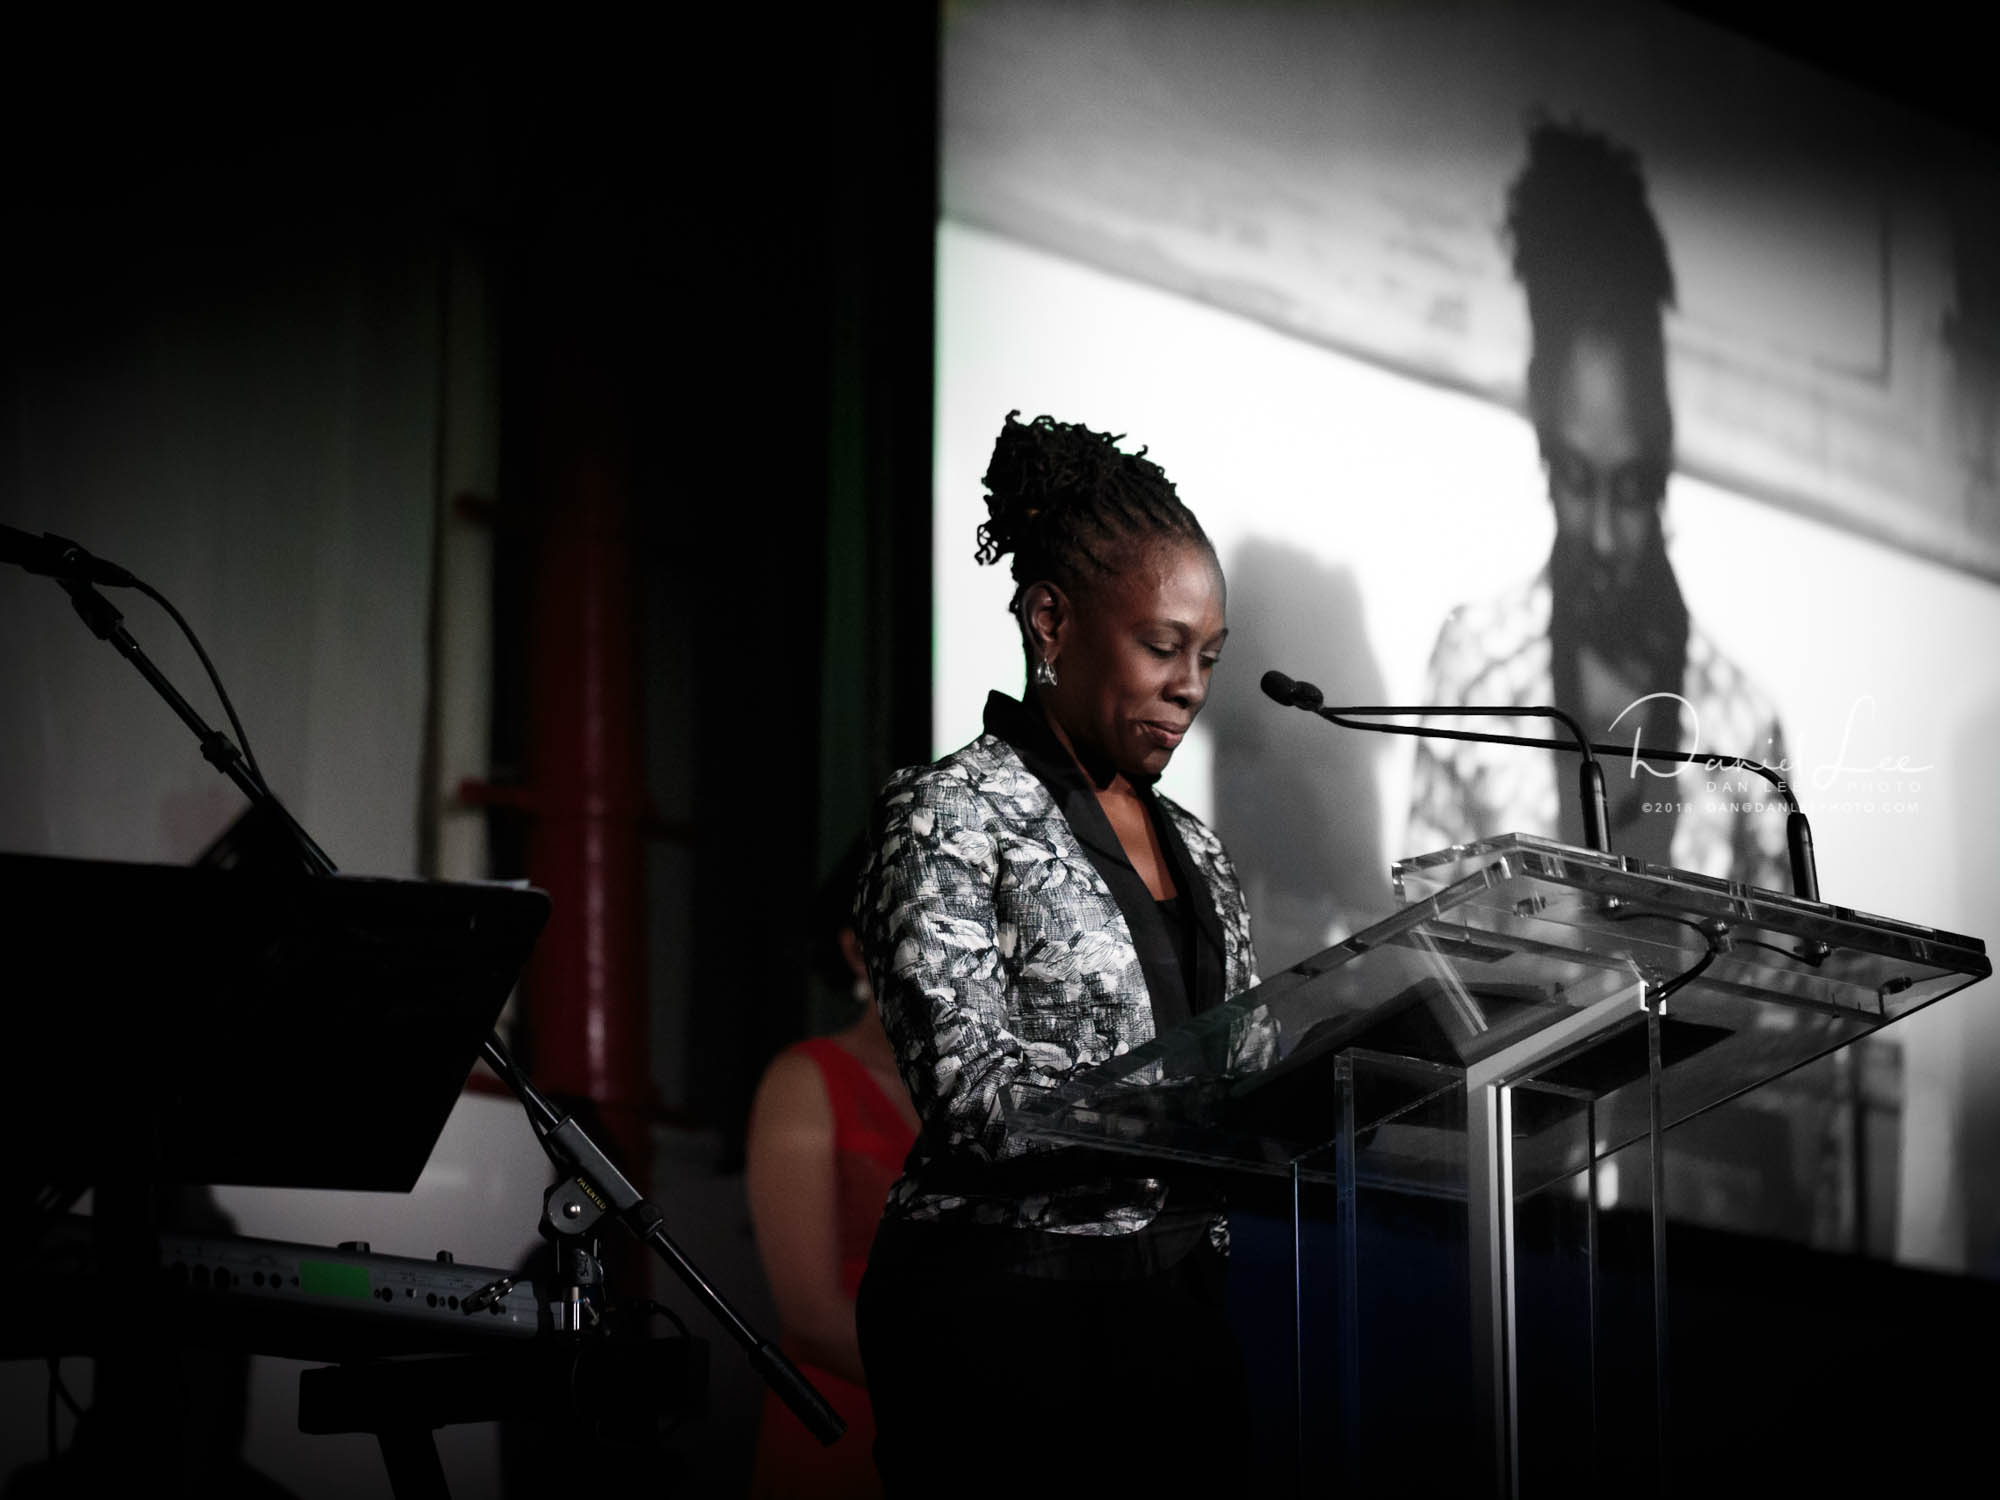  Chirlane McCray leads attendees of Korean Community Services of Metropolitan New York, Inc. (KCS)'s 42nd Anniversary Gala through a moment of silence for victims of the Paris attacks on November 13, 2015. Photo by Daniel Lee. 